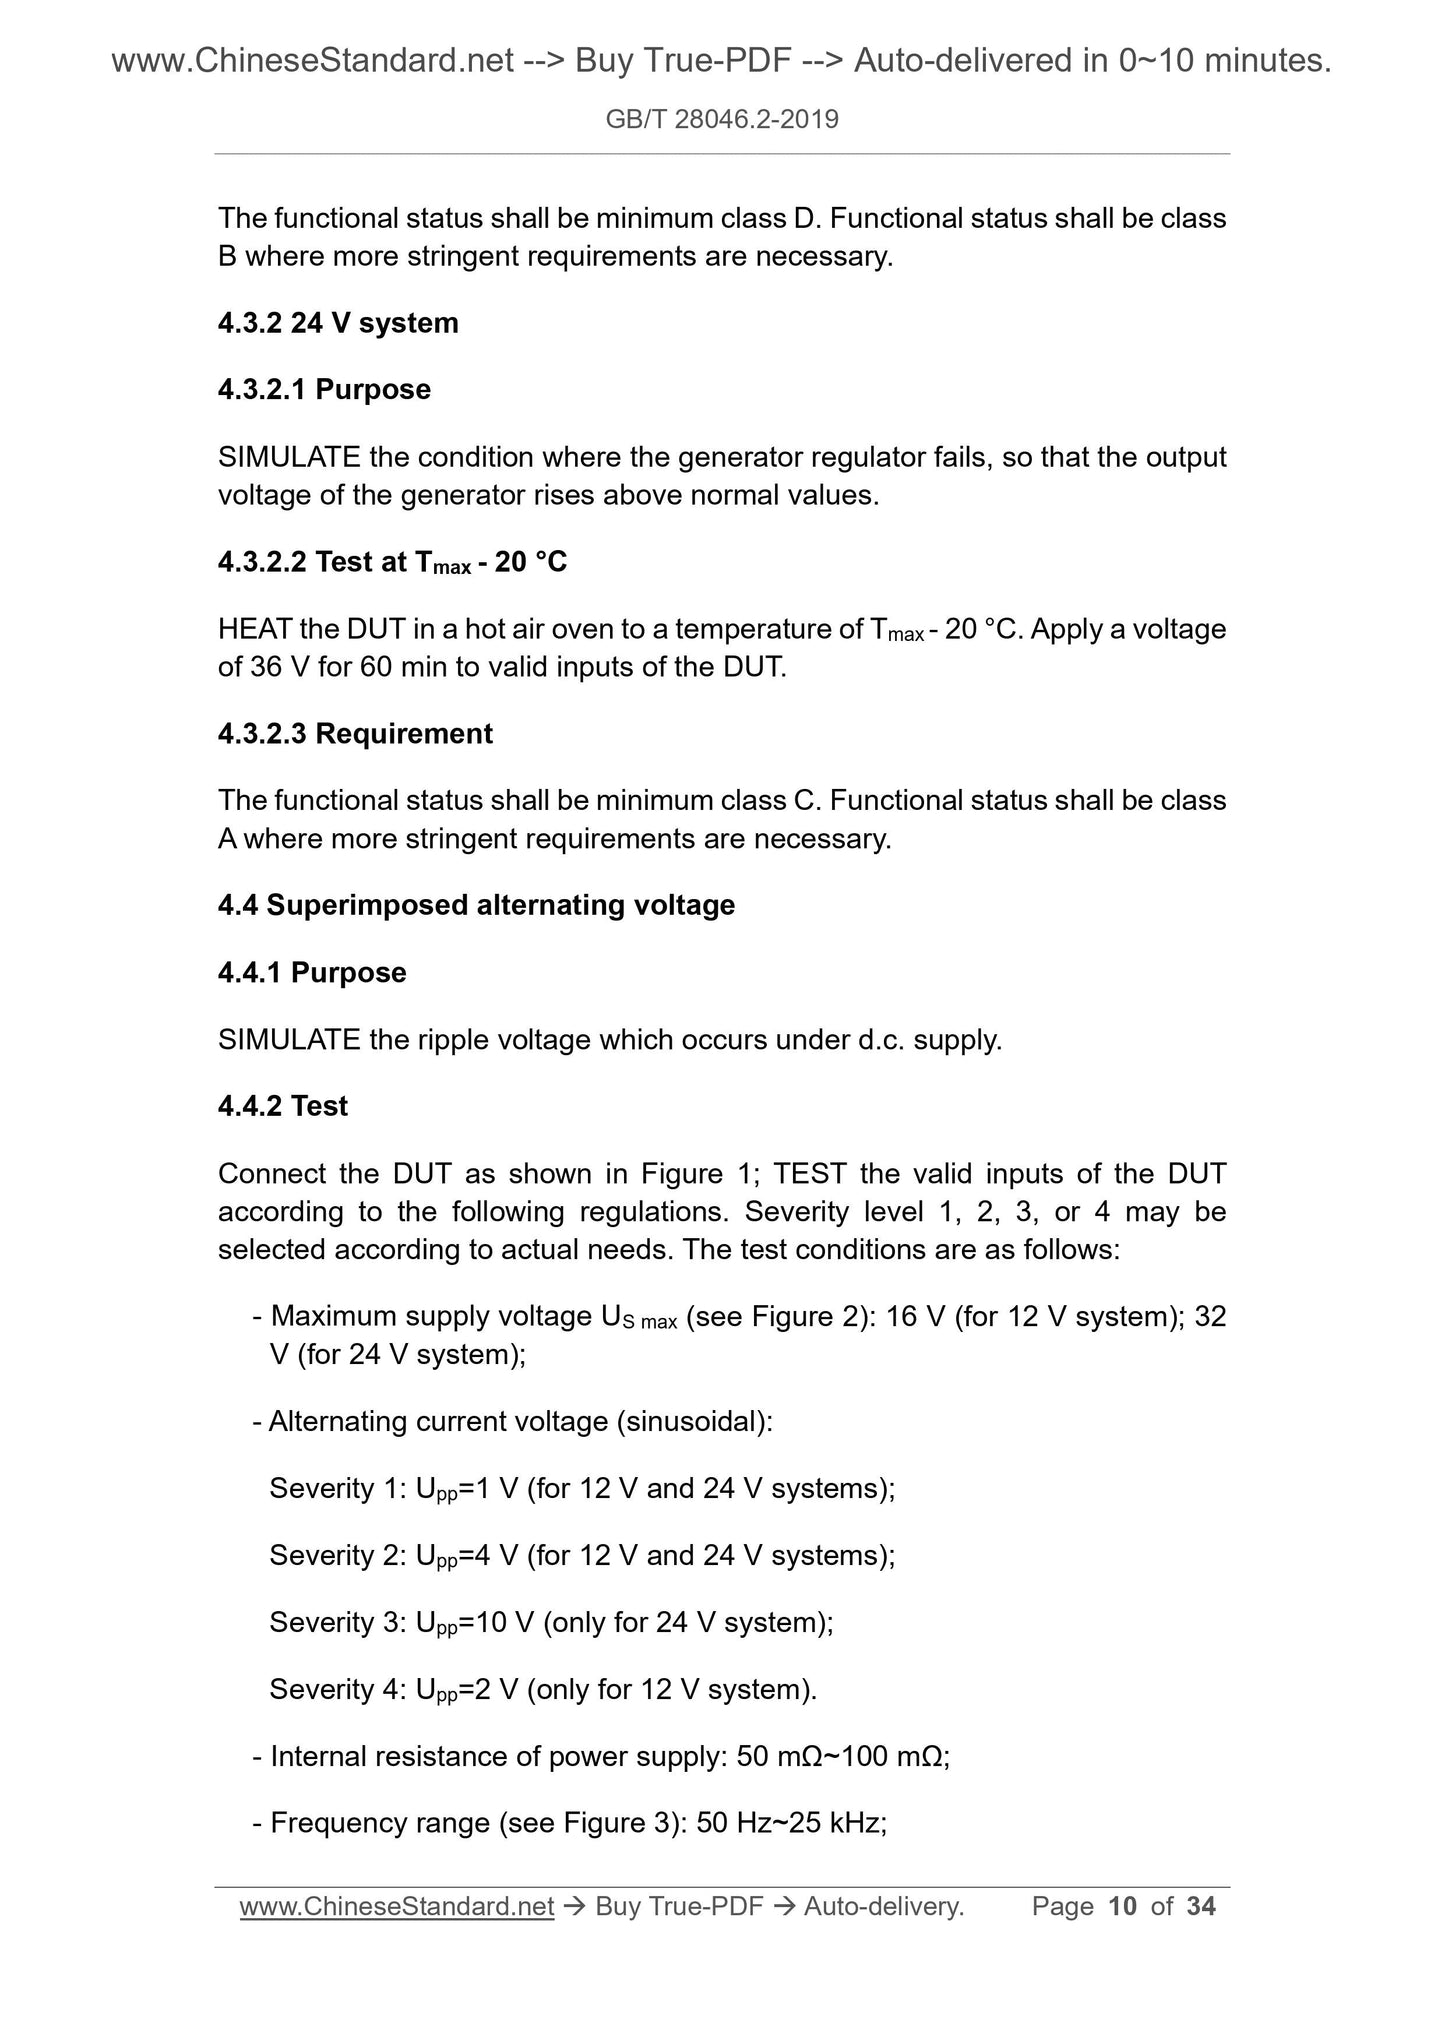 GB/T 28046.2-2019 Page 4